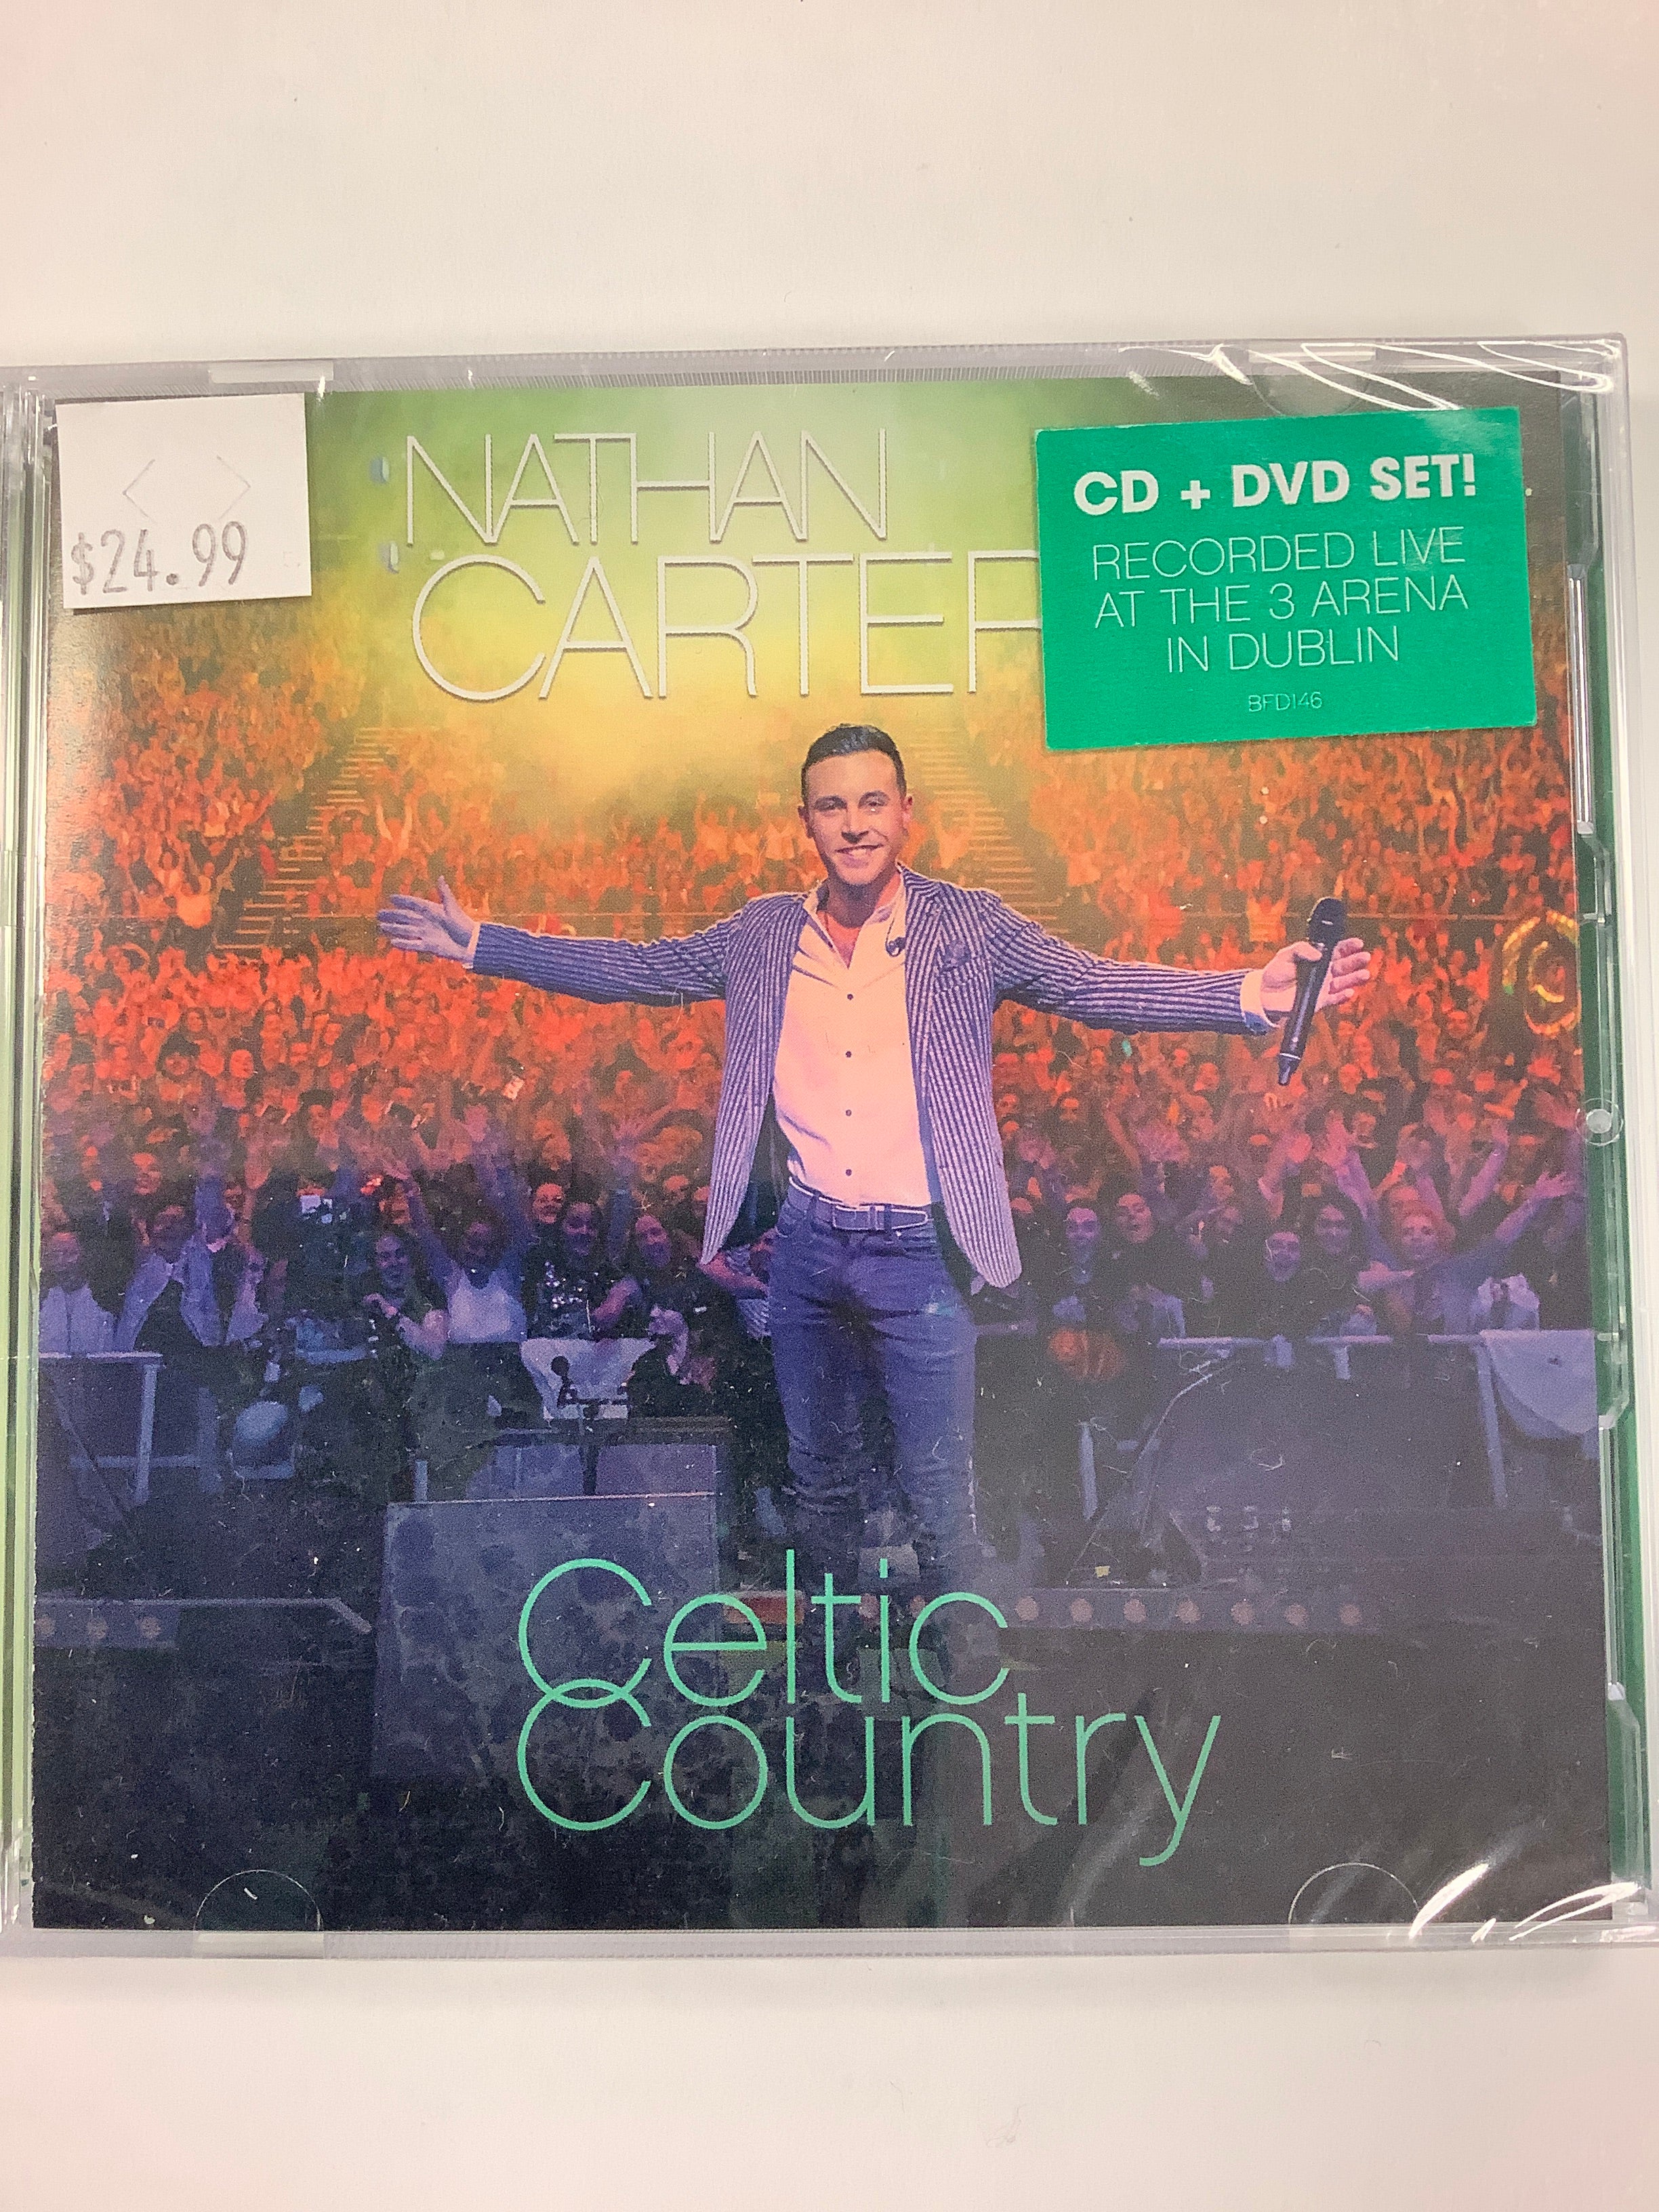 Nathan carter Celtic country